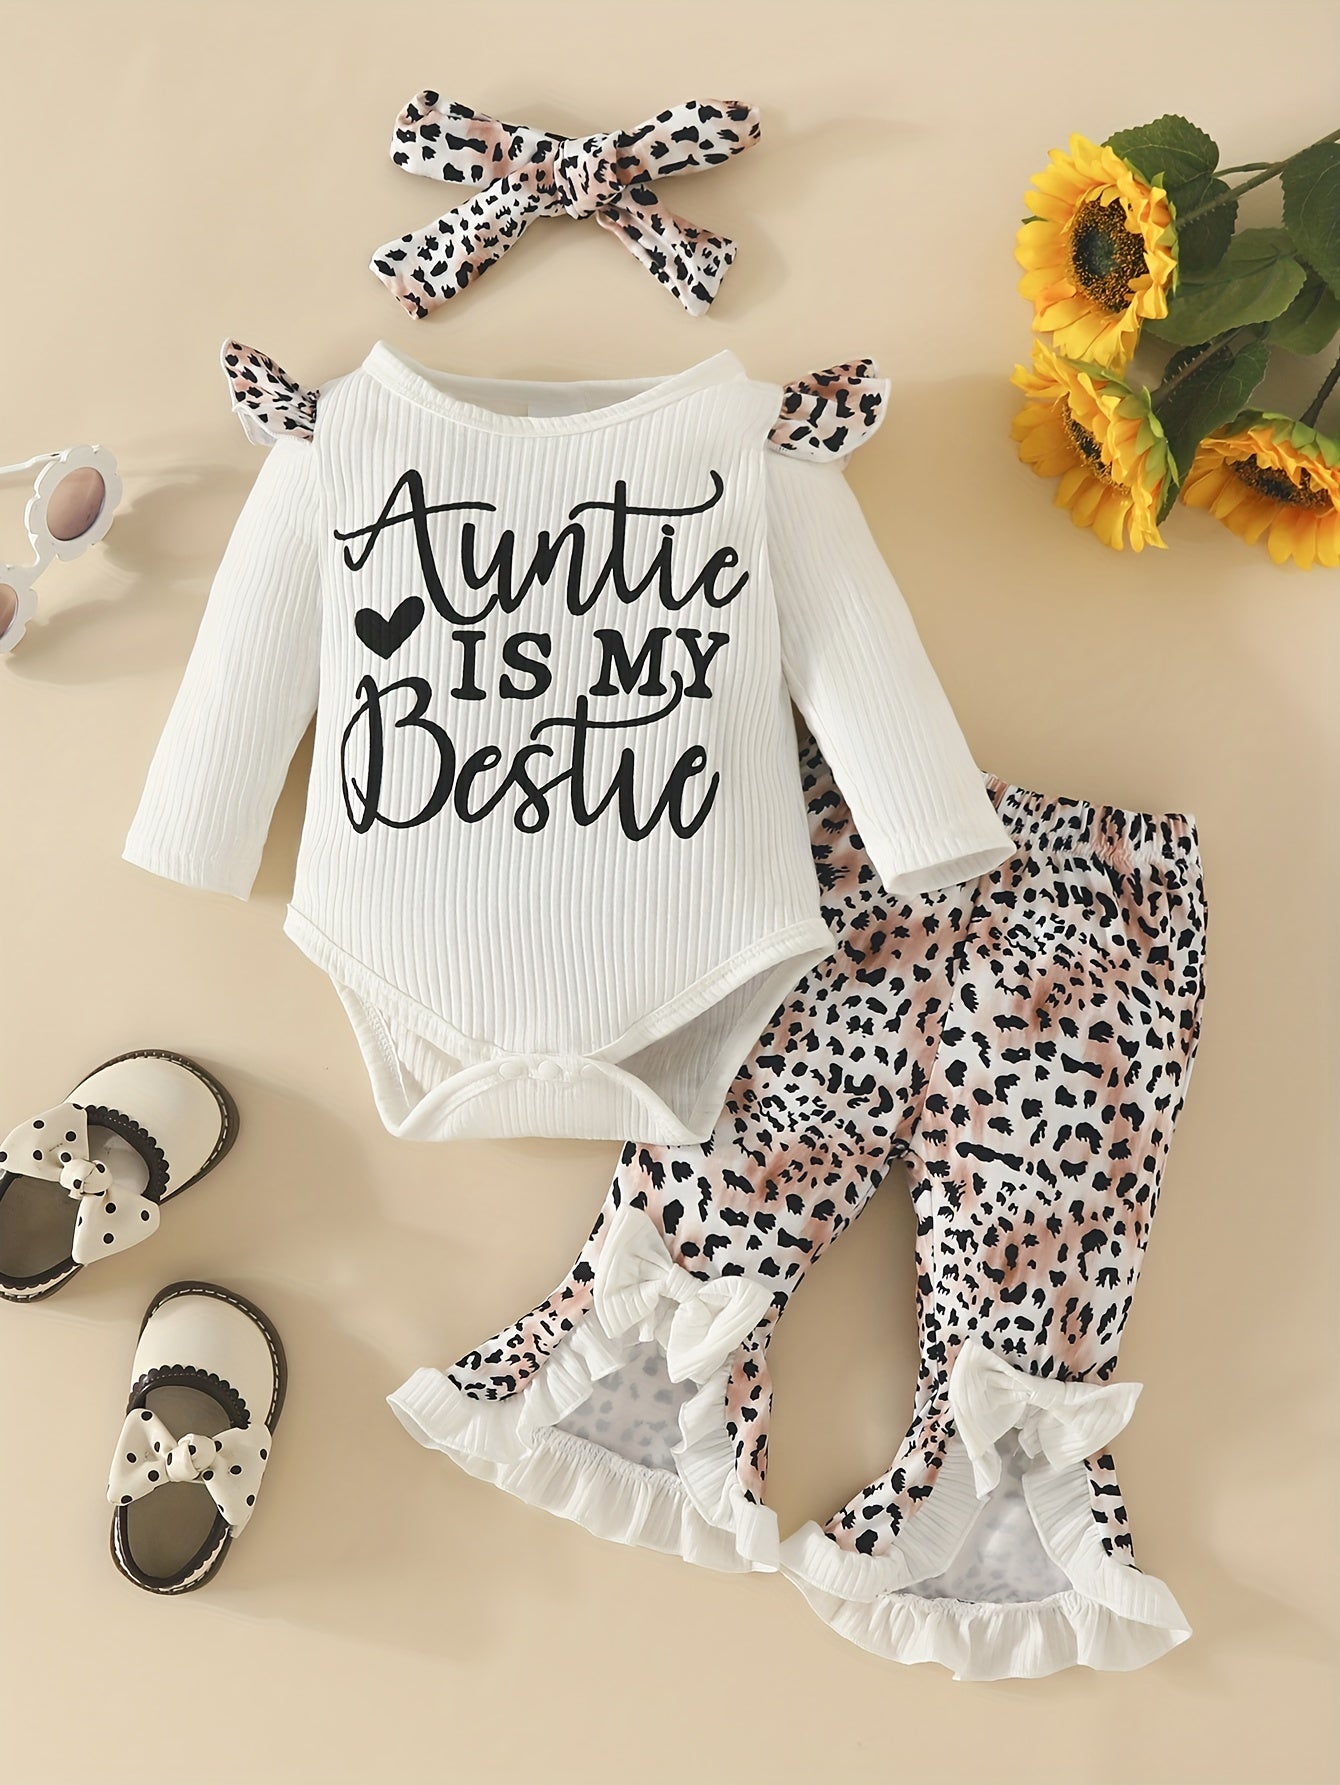 3pcs Baby Girls Stylish Outfits - Long Sleeve Ruffle Letter "Auntie Is My Bestie" Print Triangle Bodysuit & Leopard Print Slit Flared Pants & Hairband Set For Fall Winter